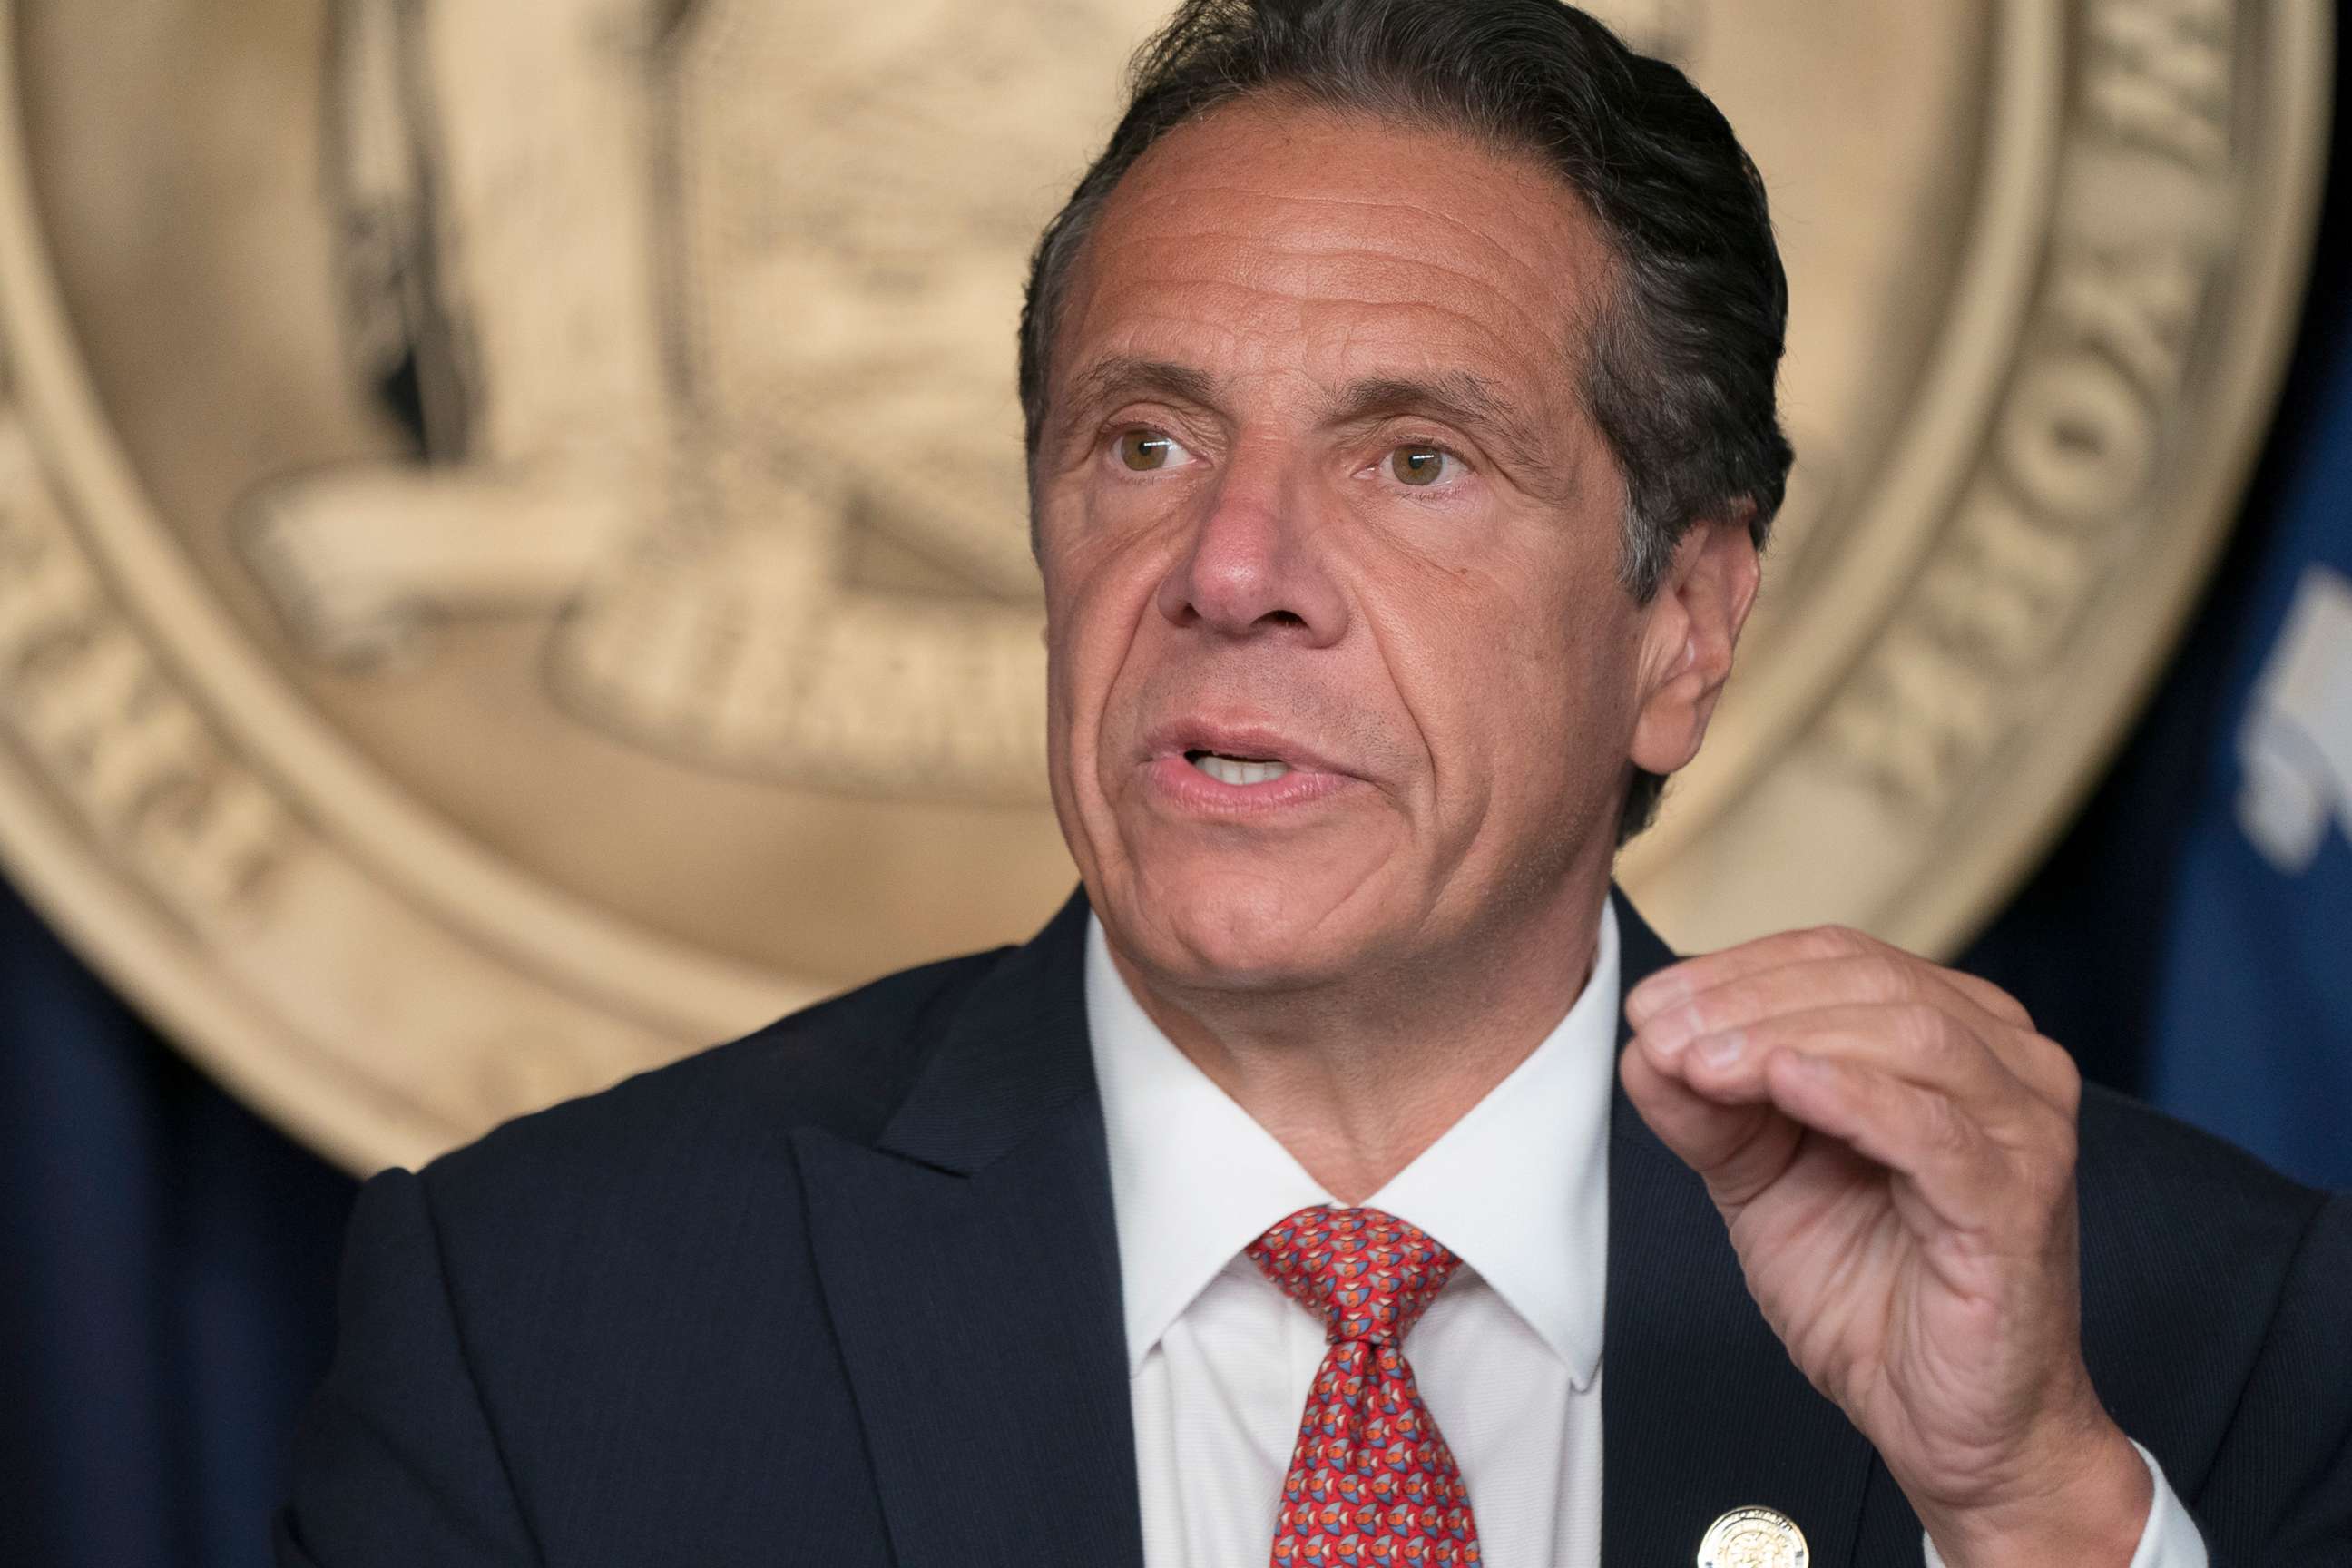 PHOTO: New York Governor Andrew Cuomo holds press briefing and makes announcement to combat COVID-19 Delta variant, Aug. 2, 2021, in New York.